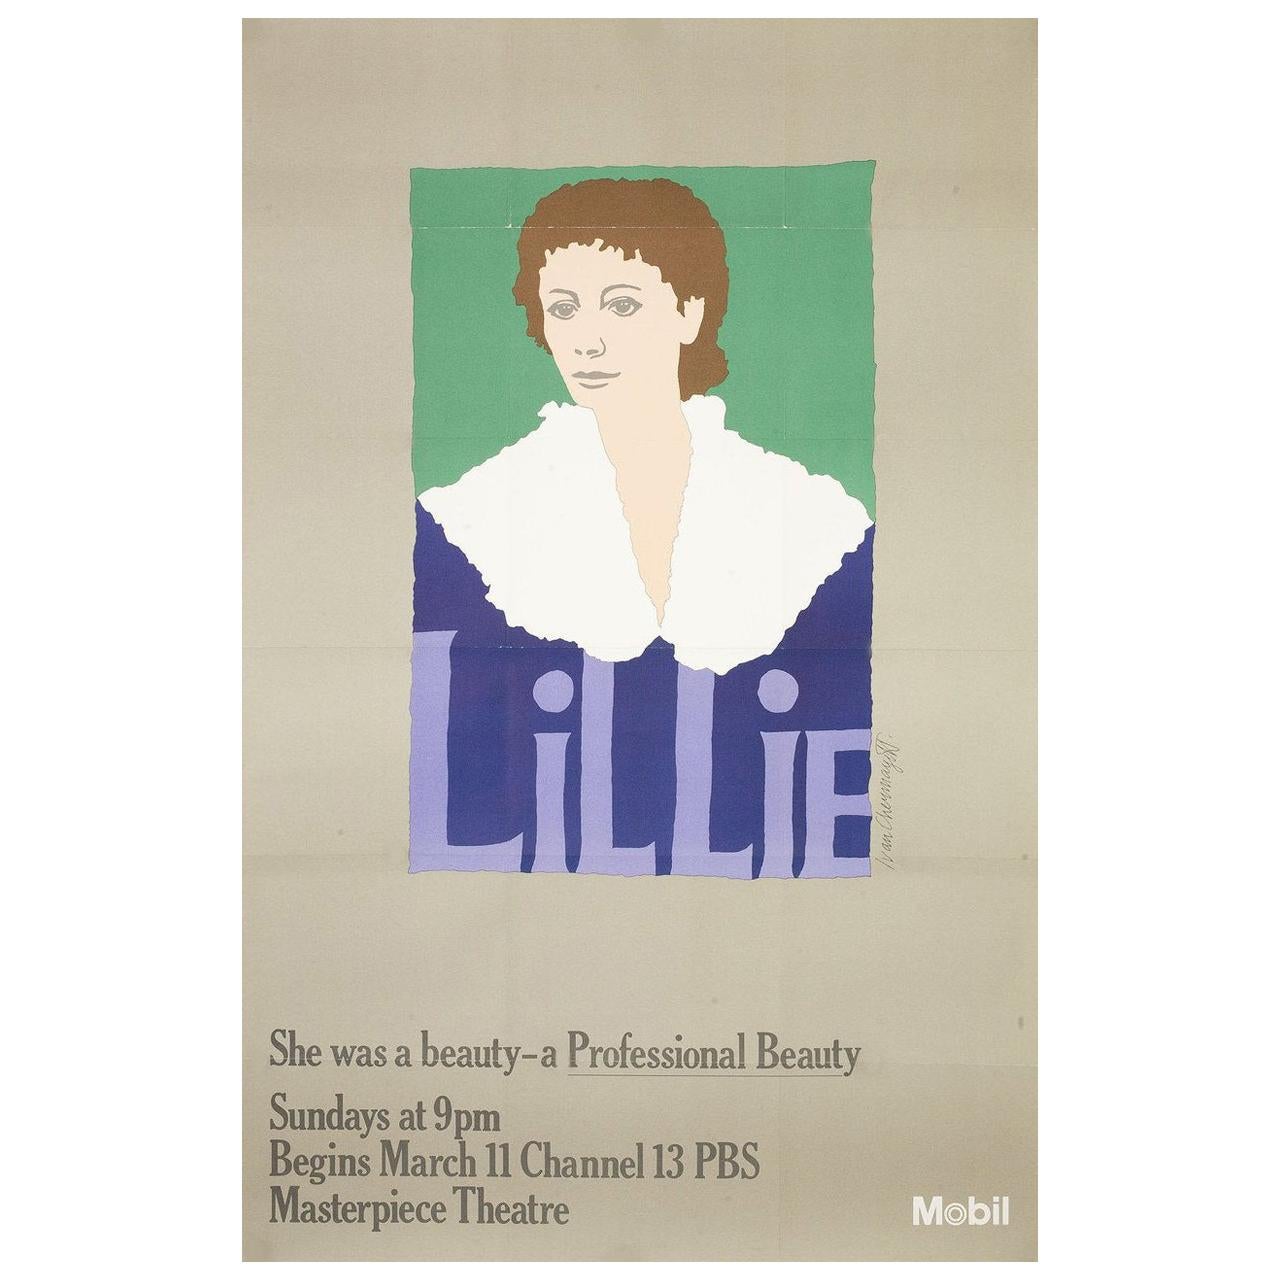 "Lillie" 1978 U.S. A0 Poster For Sale